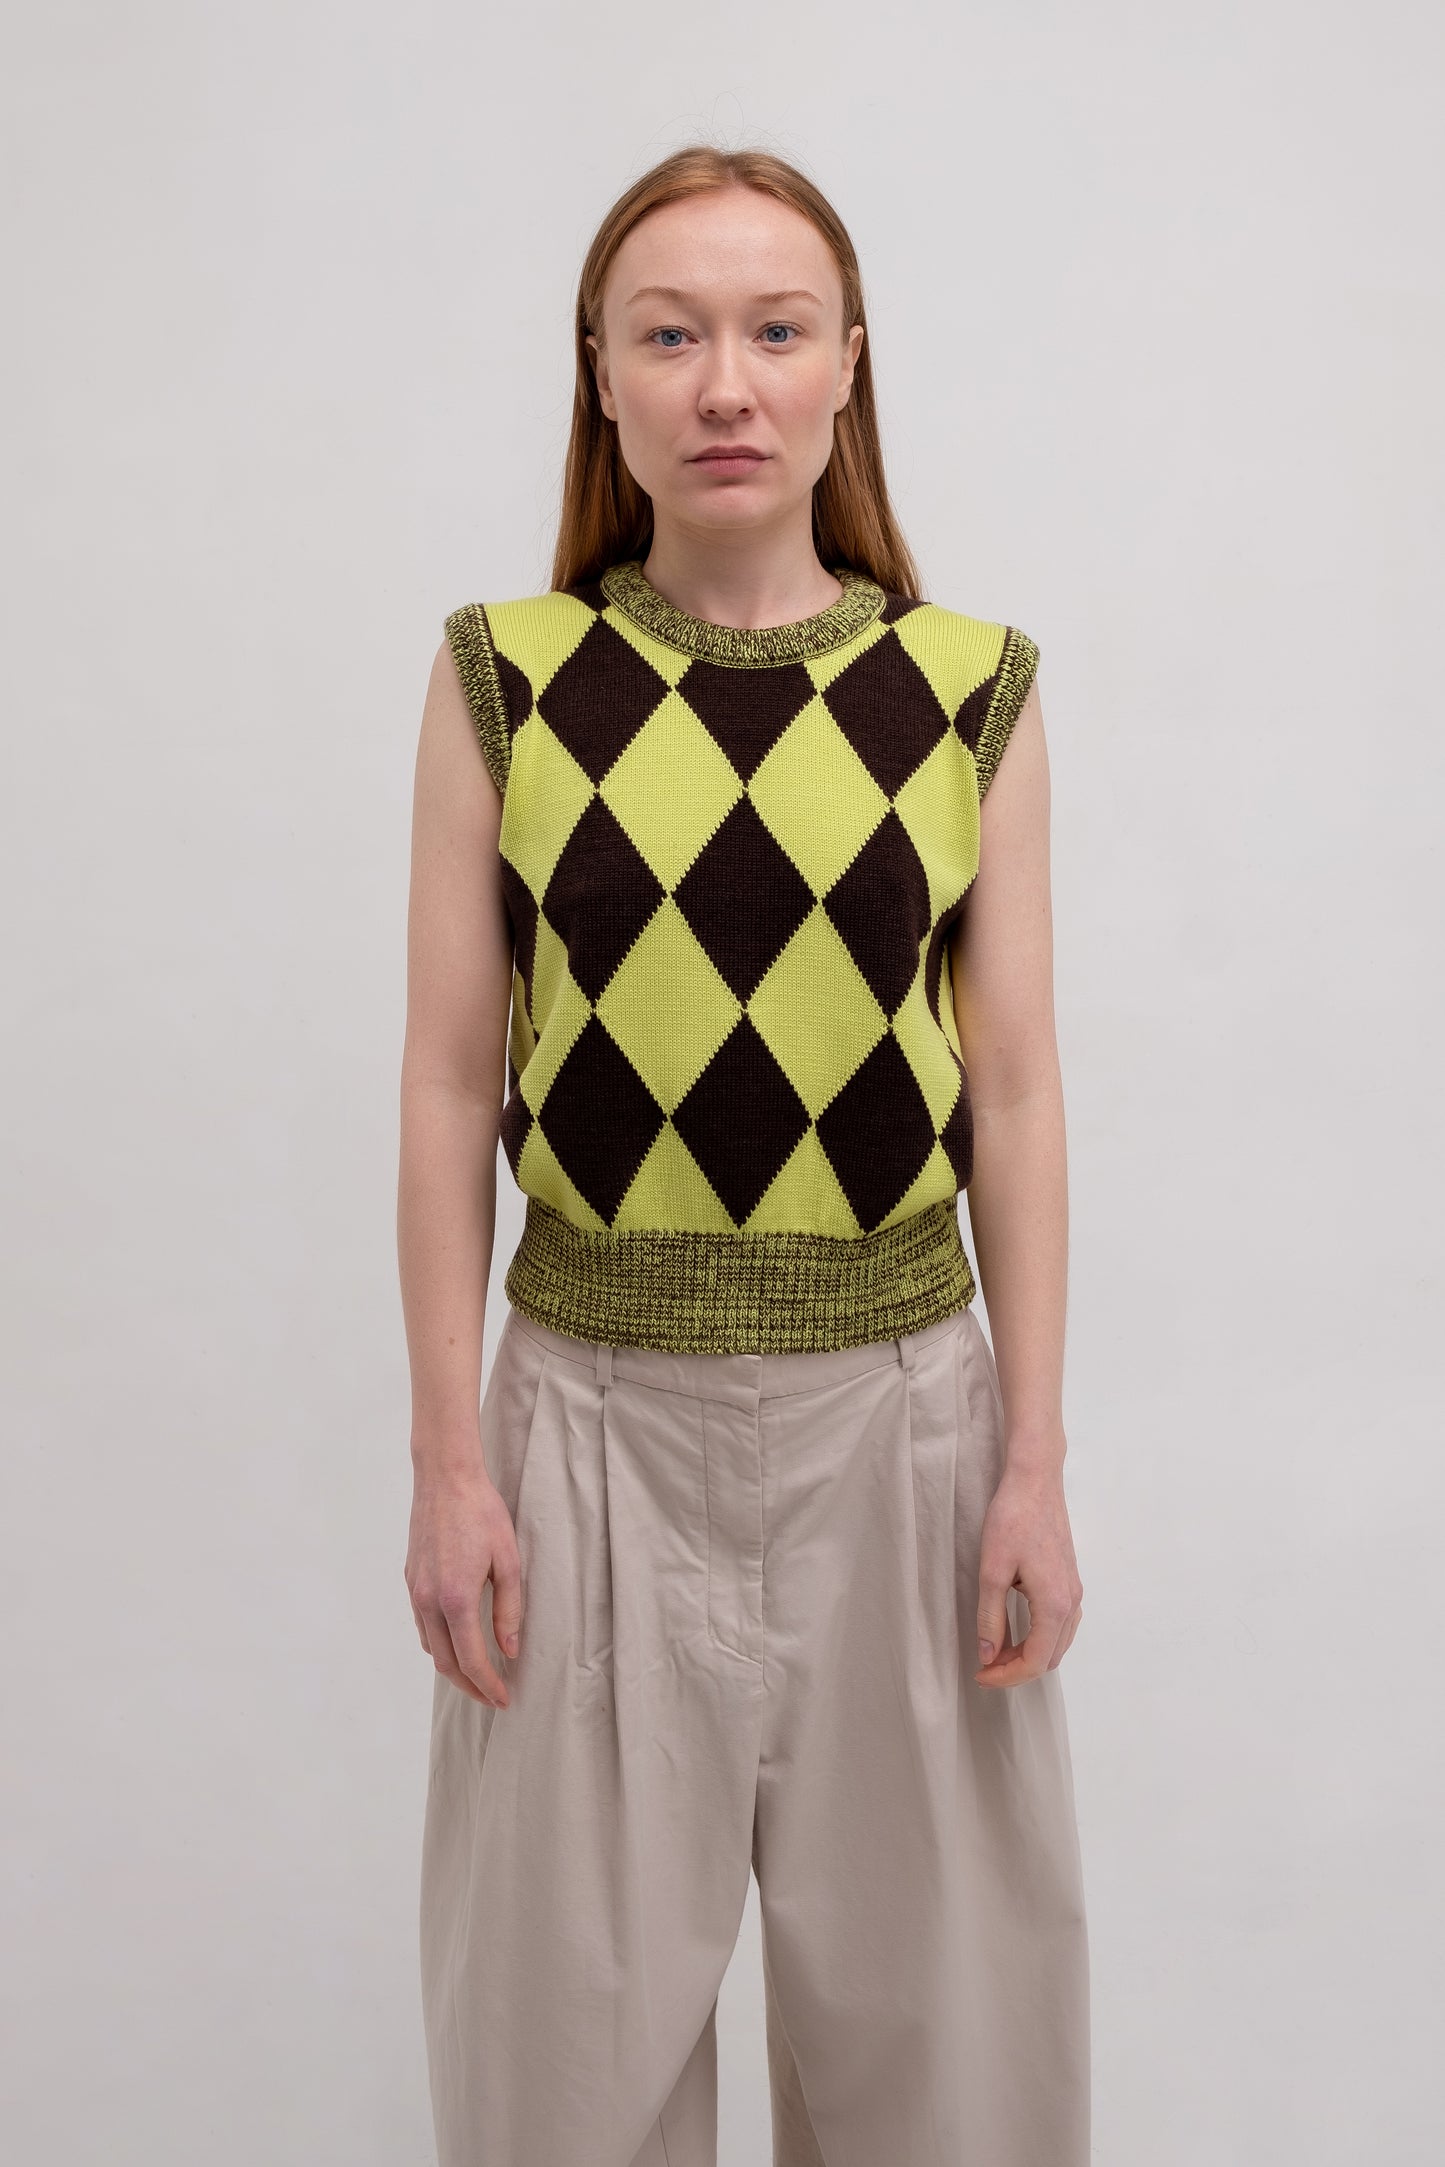 Green and Brown Chessboard Vest